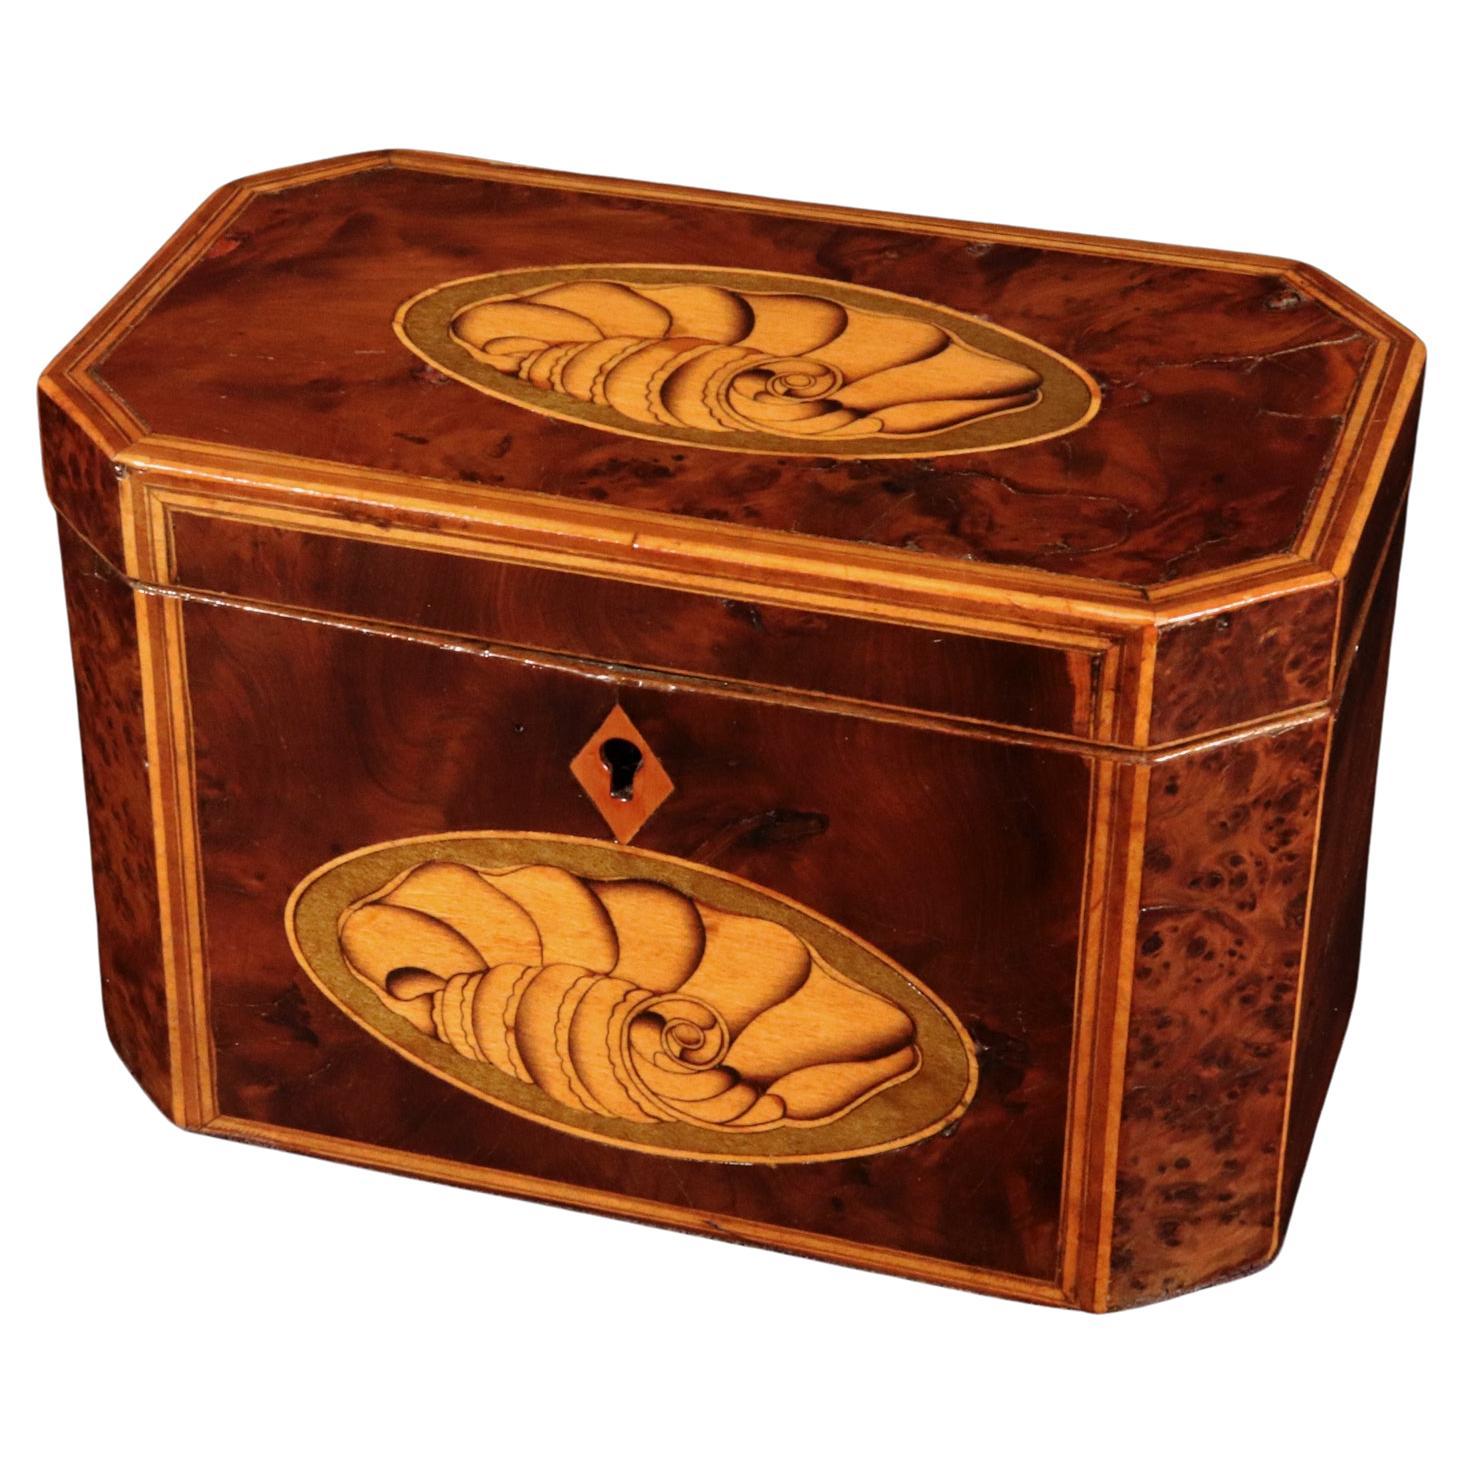 Georgian Burl Yew and Satinwood Octagonal Tea Caddy with Conch Shell Panels